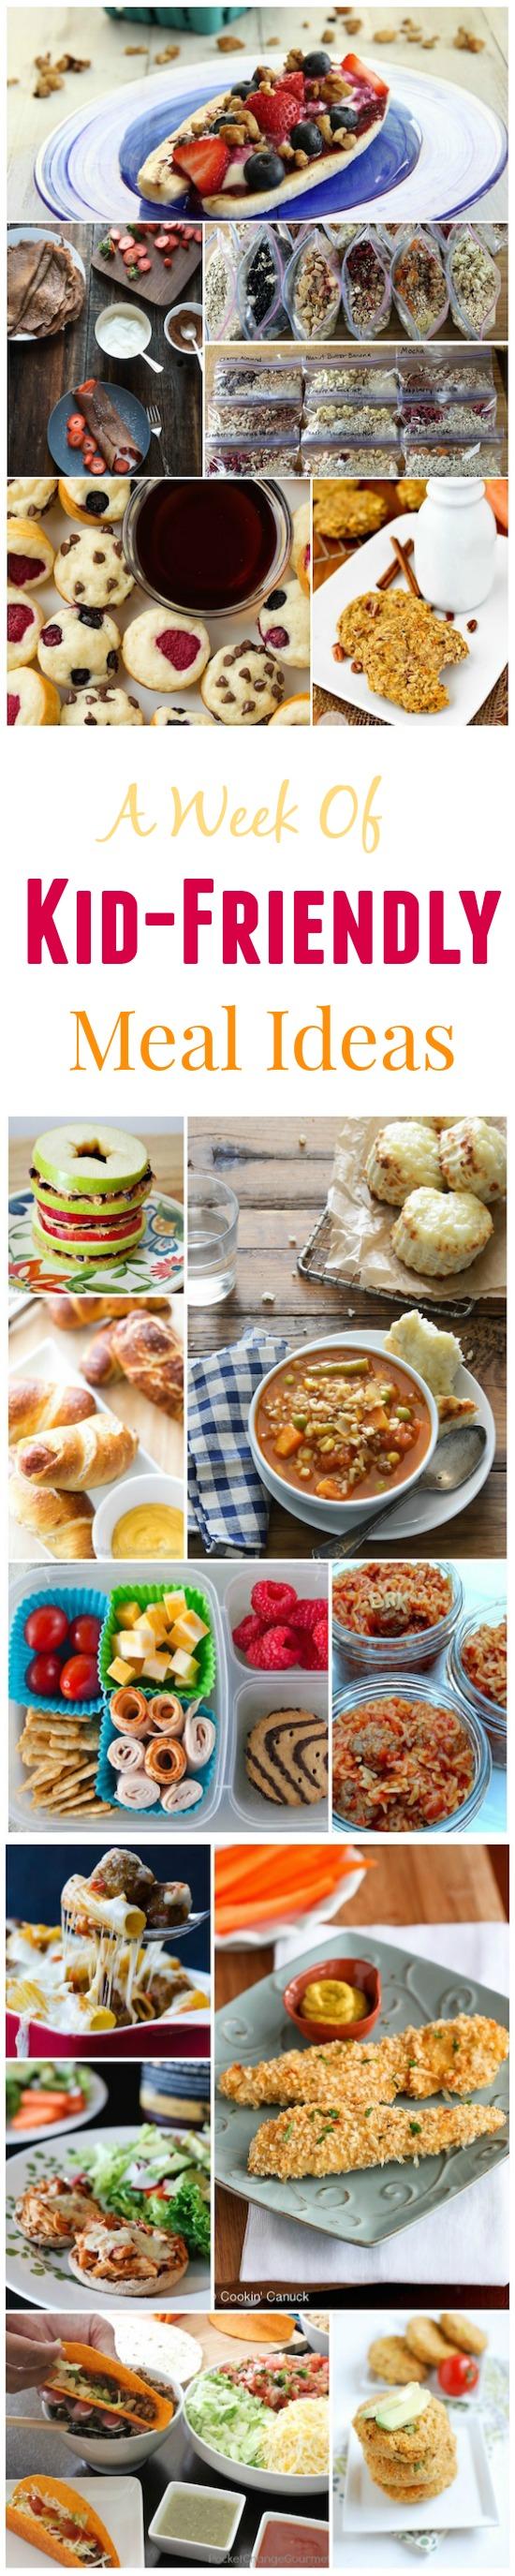 A Week of Kid-Friendly Meal Ideas to inspire you!